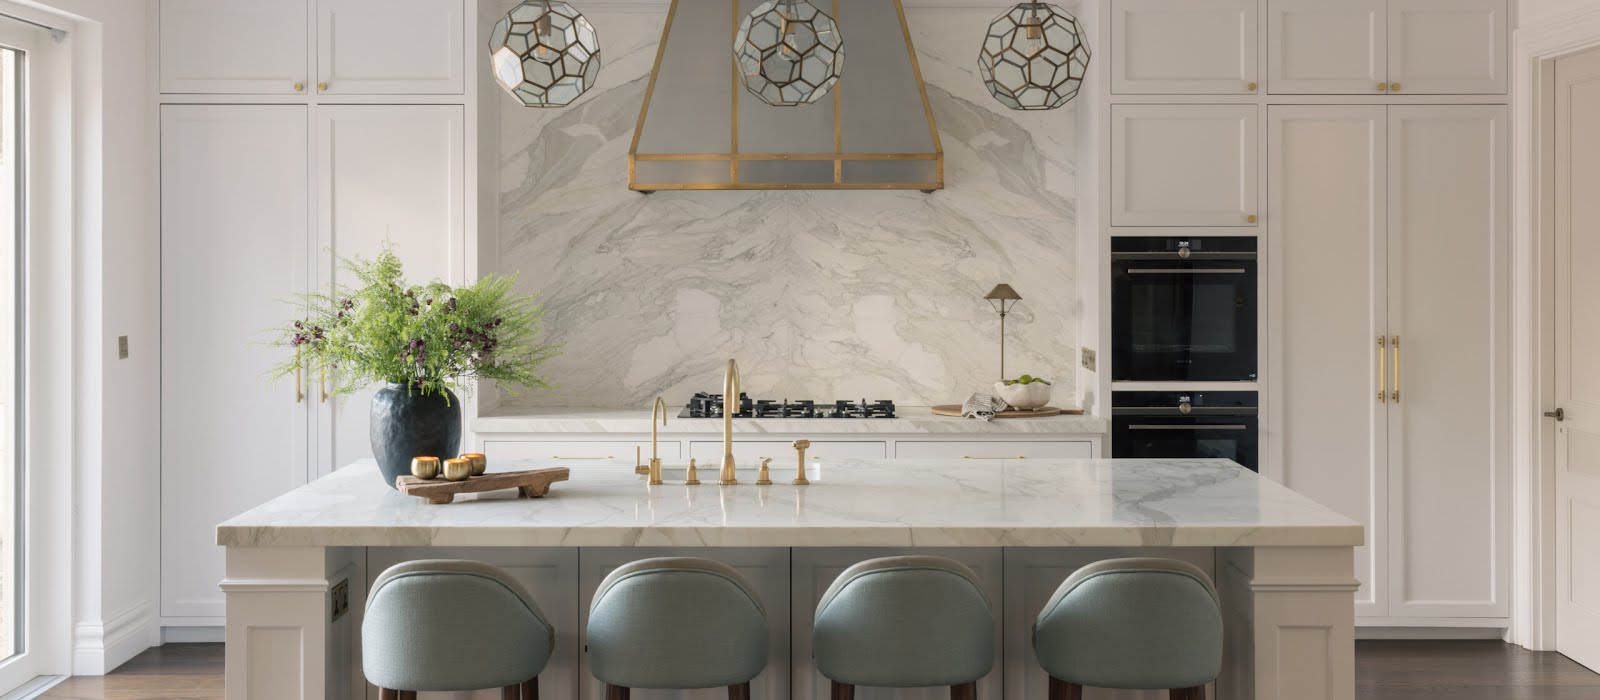 The kitchen in this Malahide home perfectly mixes tradition and glamour